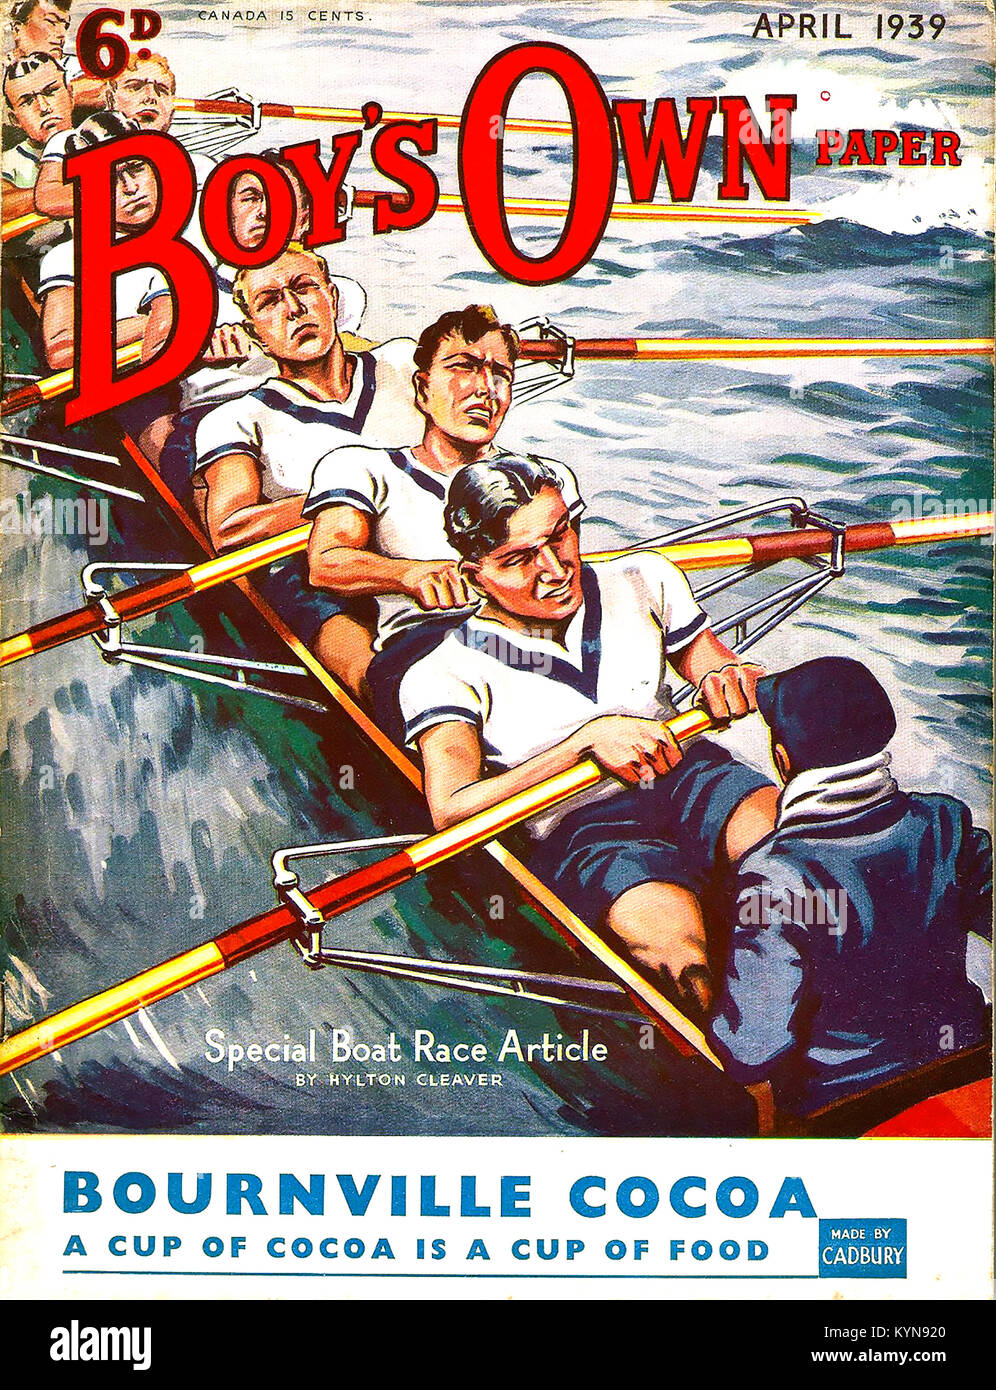 BOYS OWN PAPER cover April 1939 Stock Photo